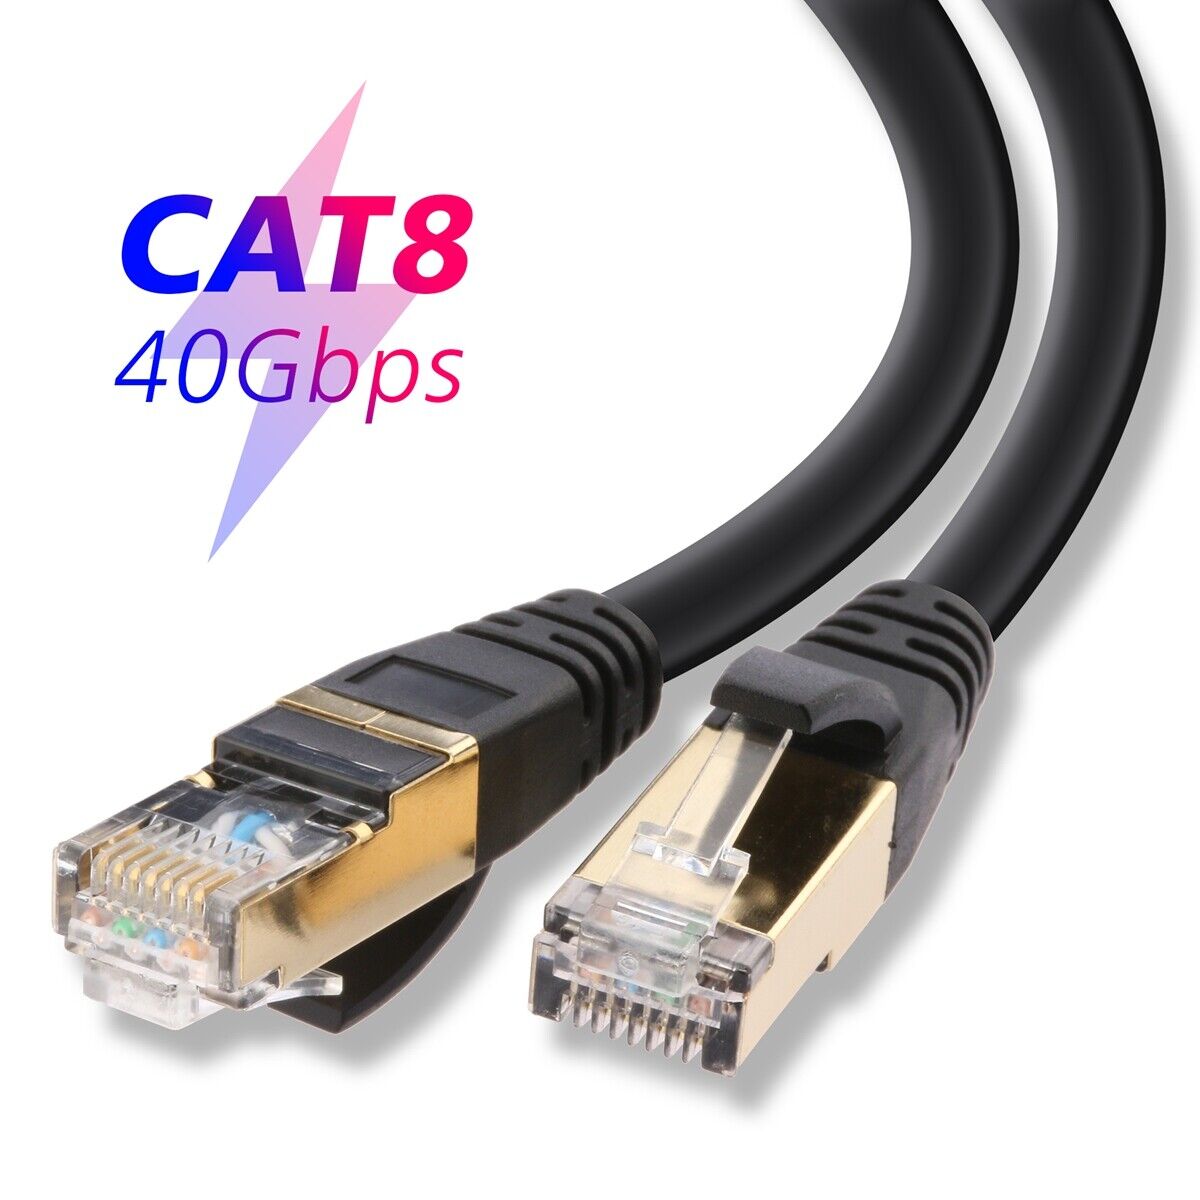 Extra-Long Cords, 50/66/75/100FT Cat 8 7 6 6a 5 5e Ethernet LAN Patch Cable